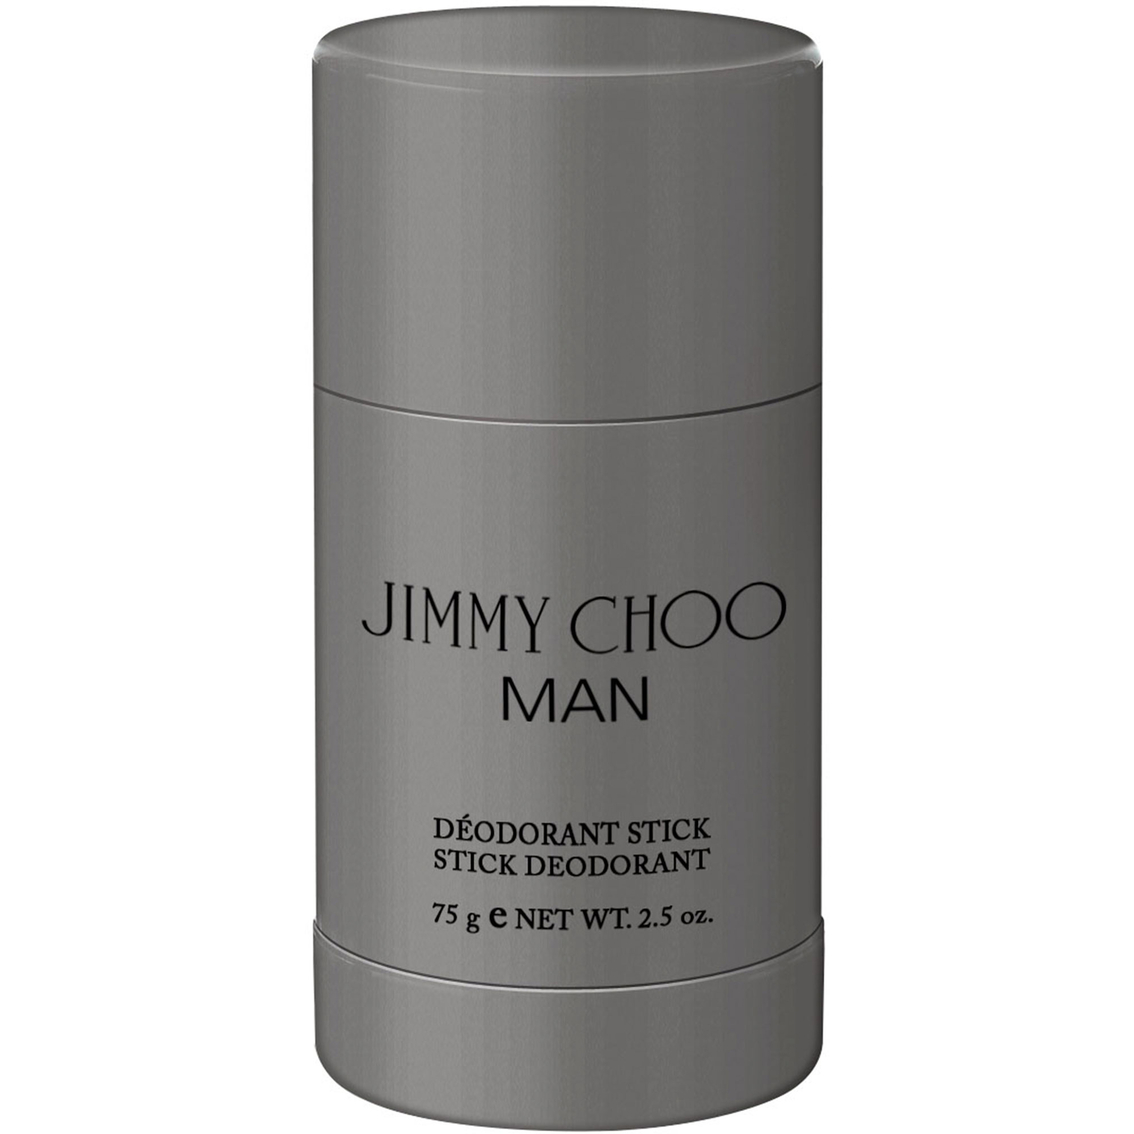 Tvunget dominere boliger Jimmy Choo Man Deodorant Stick | Atg Archive | Shop The Exchange